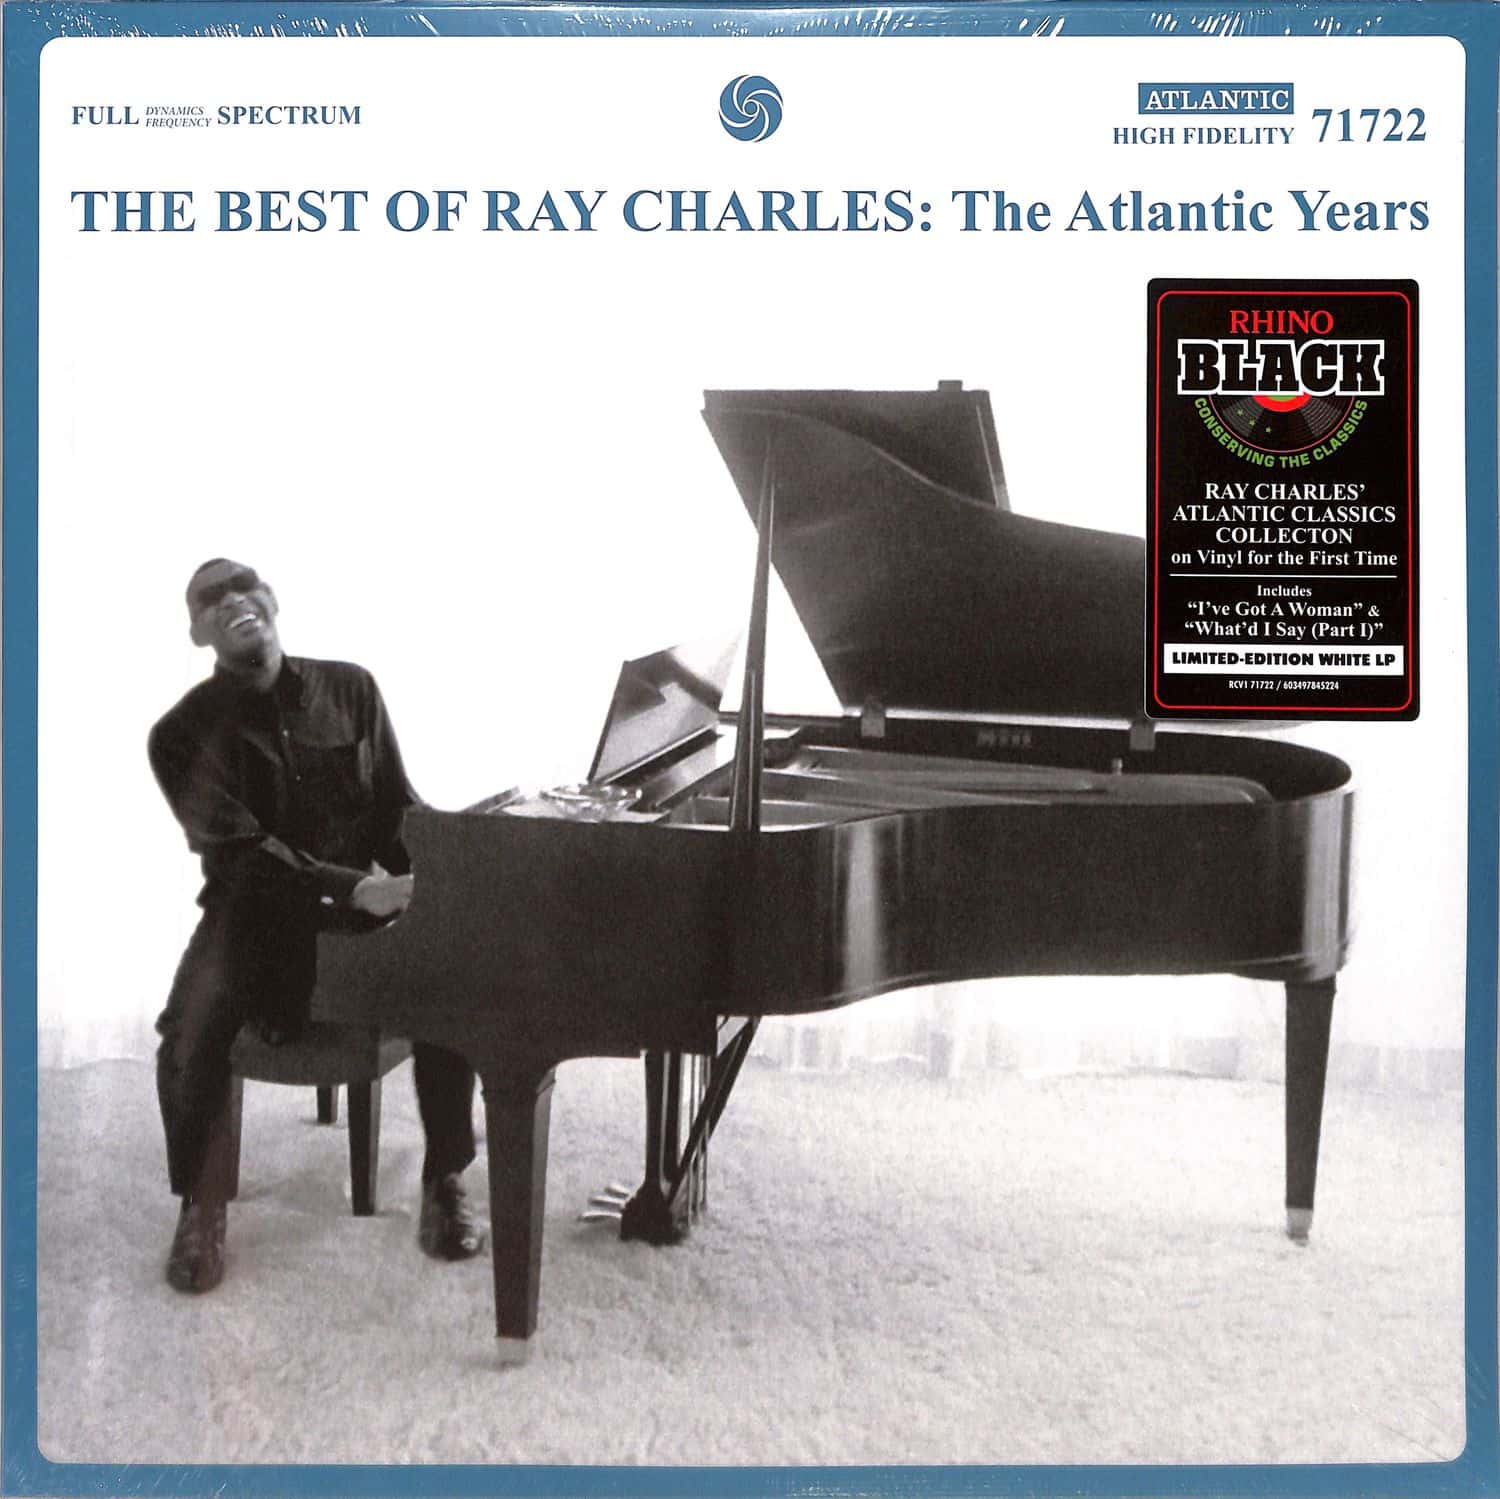 Ray Charles - THE BEST OF RAY CHARLES:THE ATLANTIC YEARS 